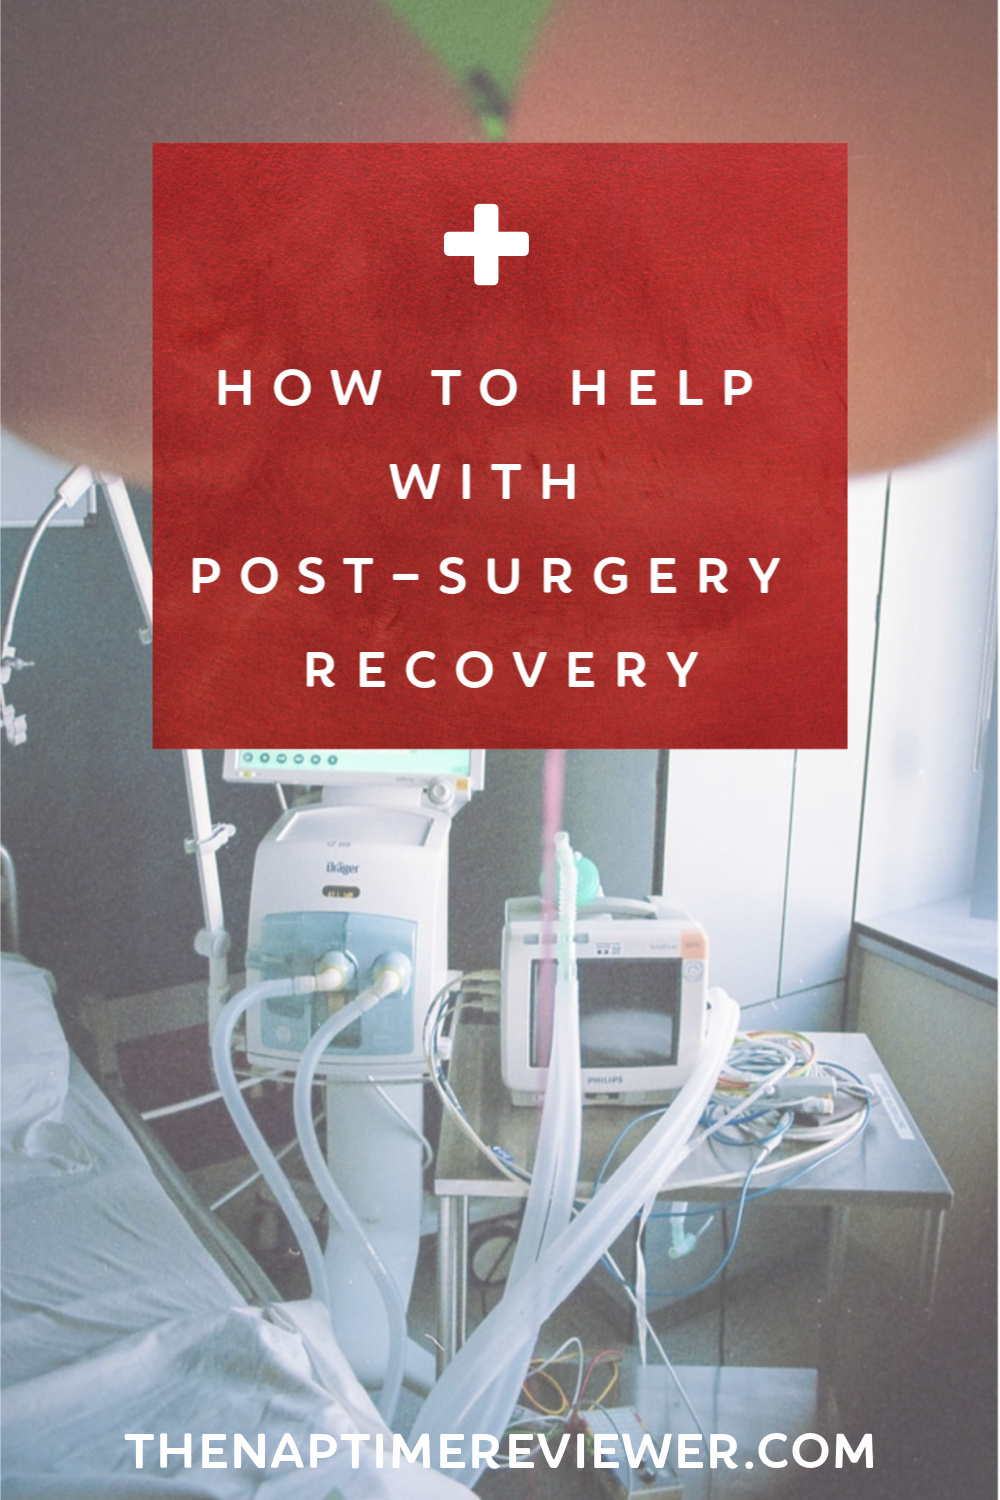 How to Help with Post-Surgery Recovery